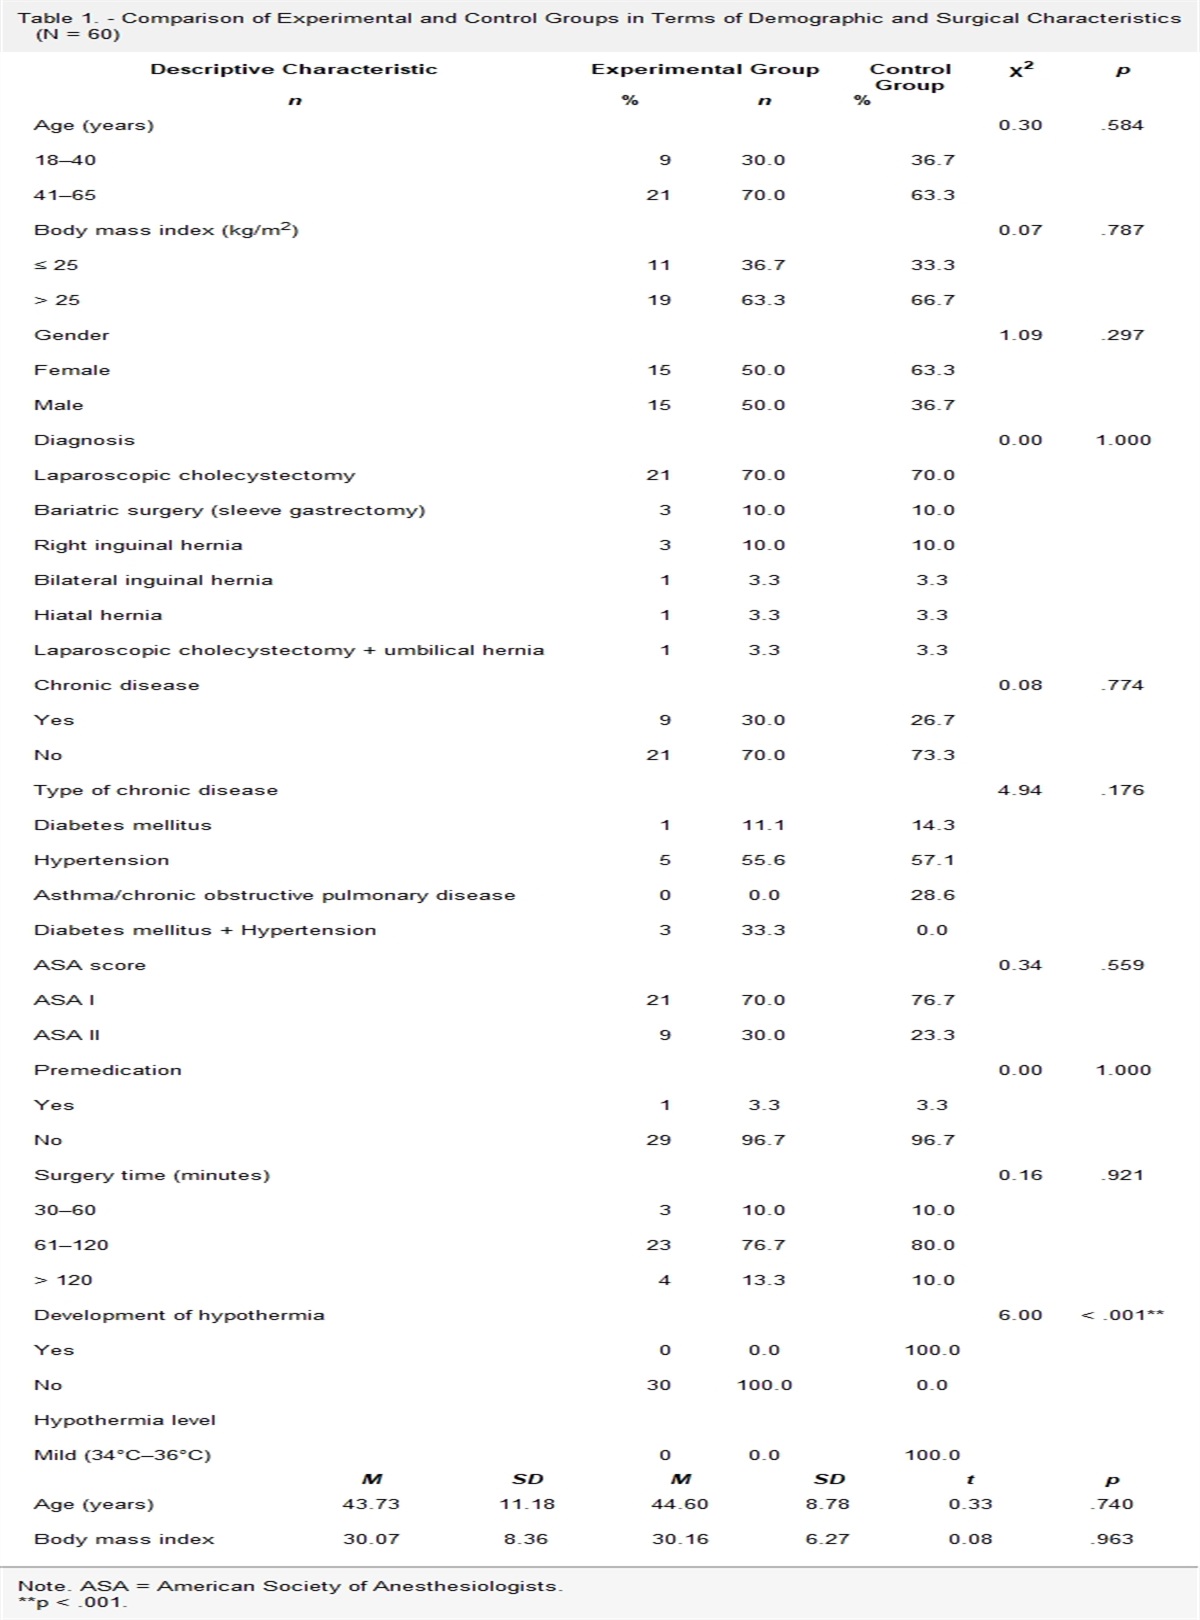 The Effect of Using a Normothermia Checklist on Awakening Time From Anesthesia and Coagulation Disorder: A Randomized Controlled Trial